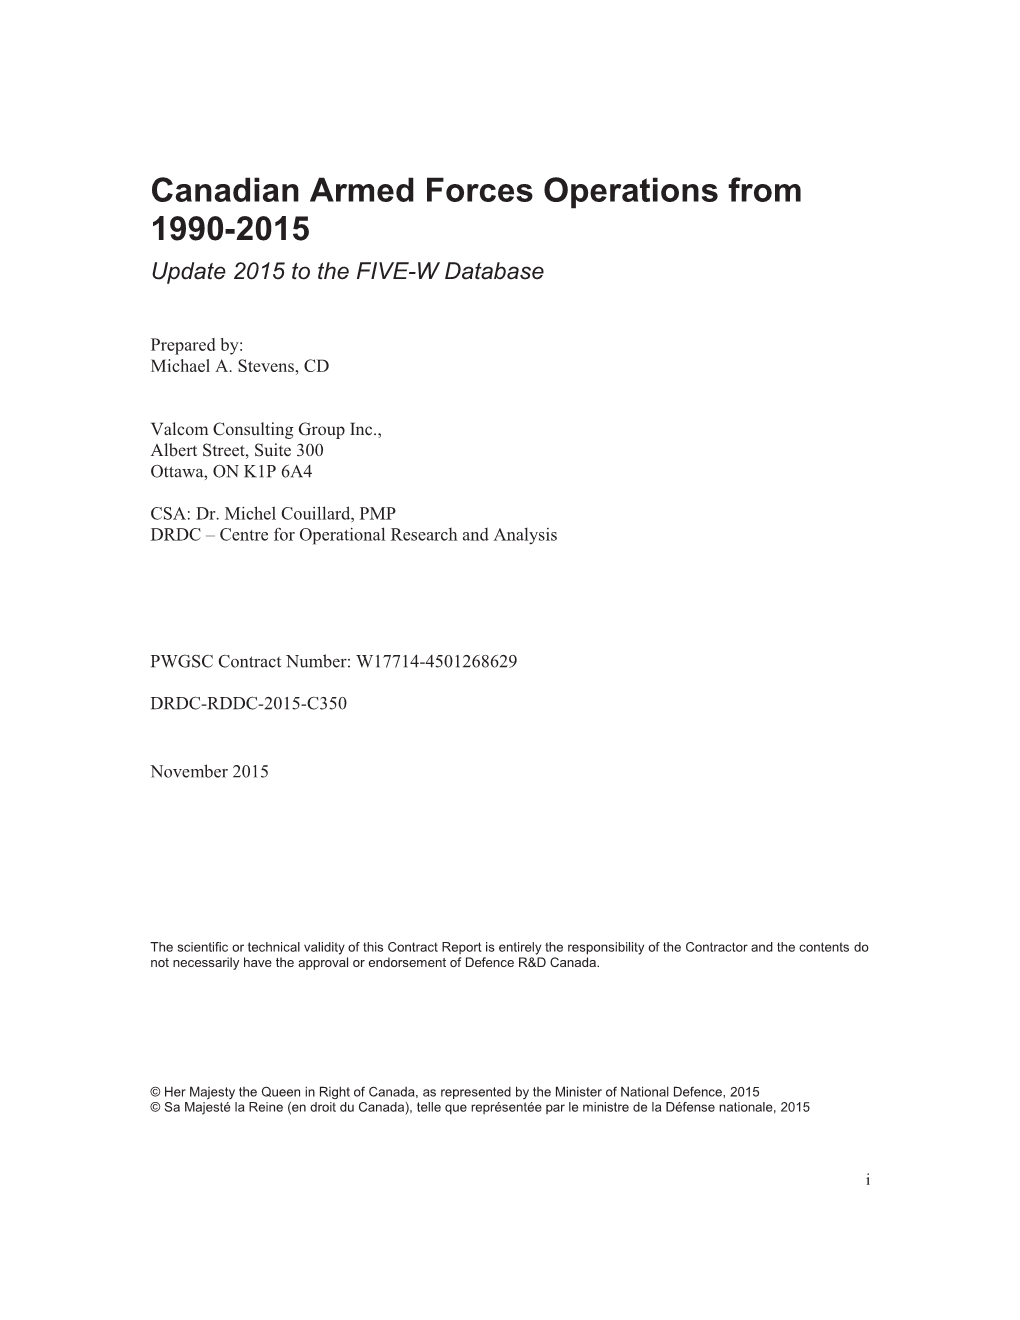 Canadian Armed Forces Operations from 1990-2015 Update 2015 to the FIVE-W Database